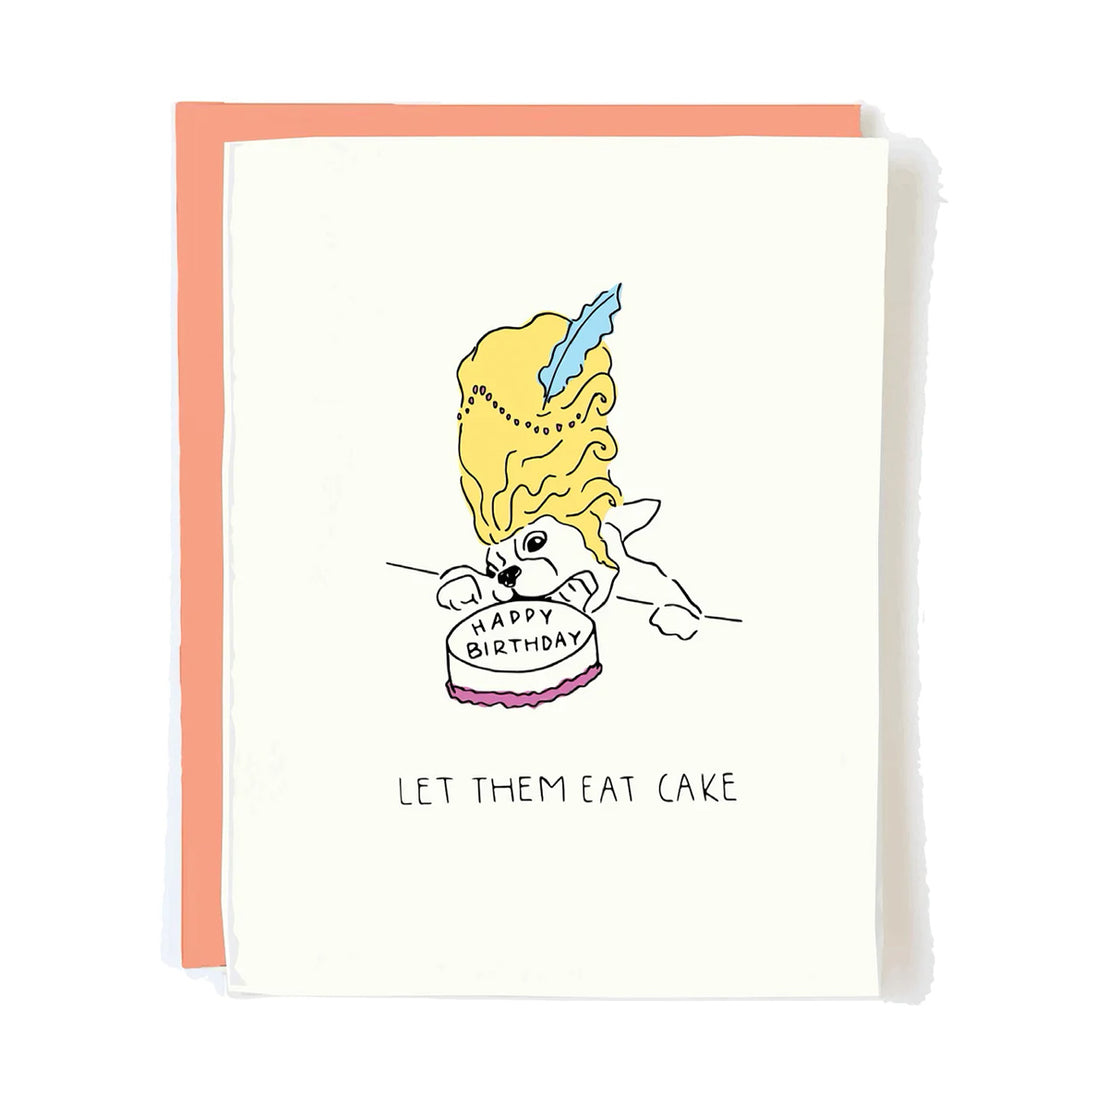 Let Them Eat Cake Frenchie, Pop + Paper